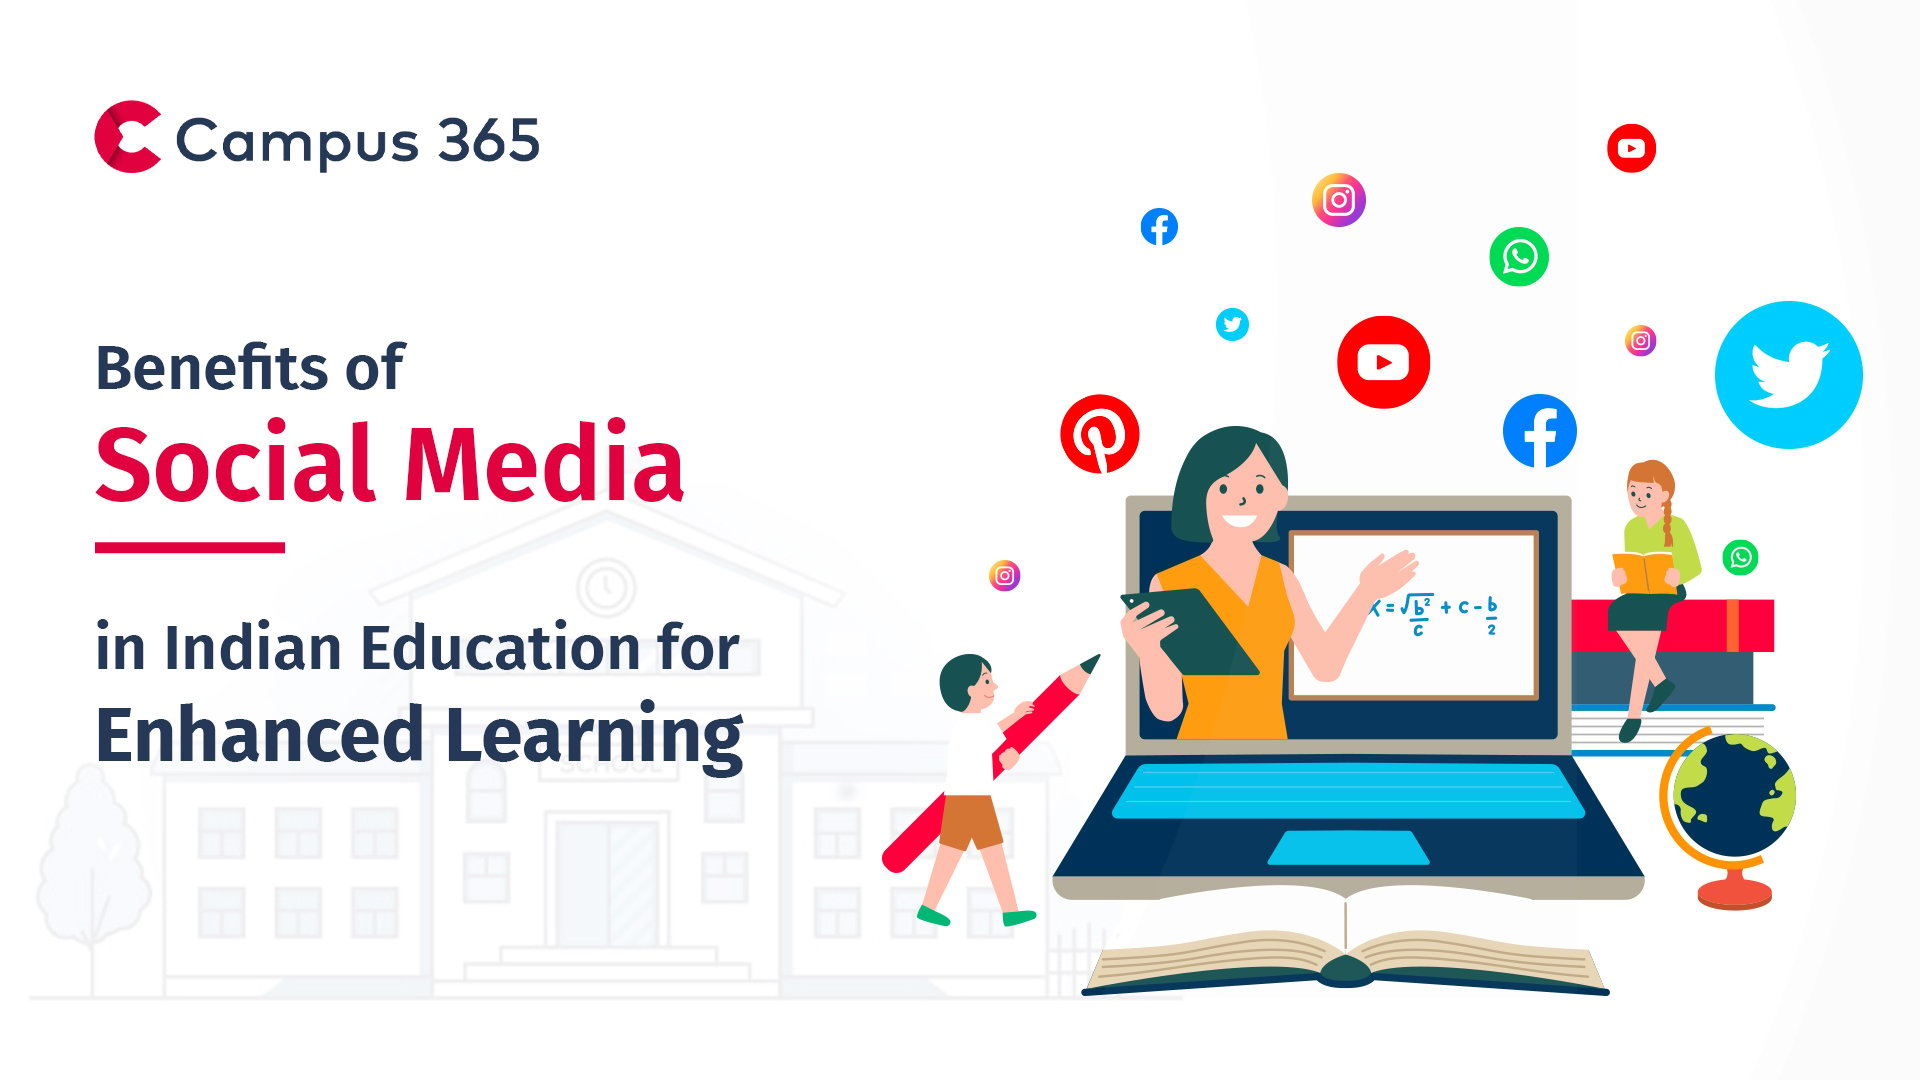 Role of Social Media in Indian Education